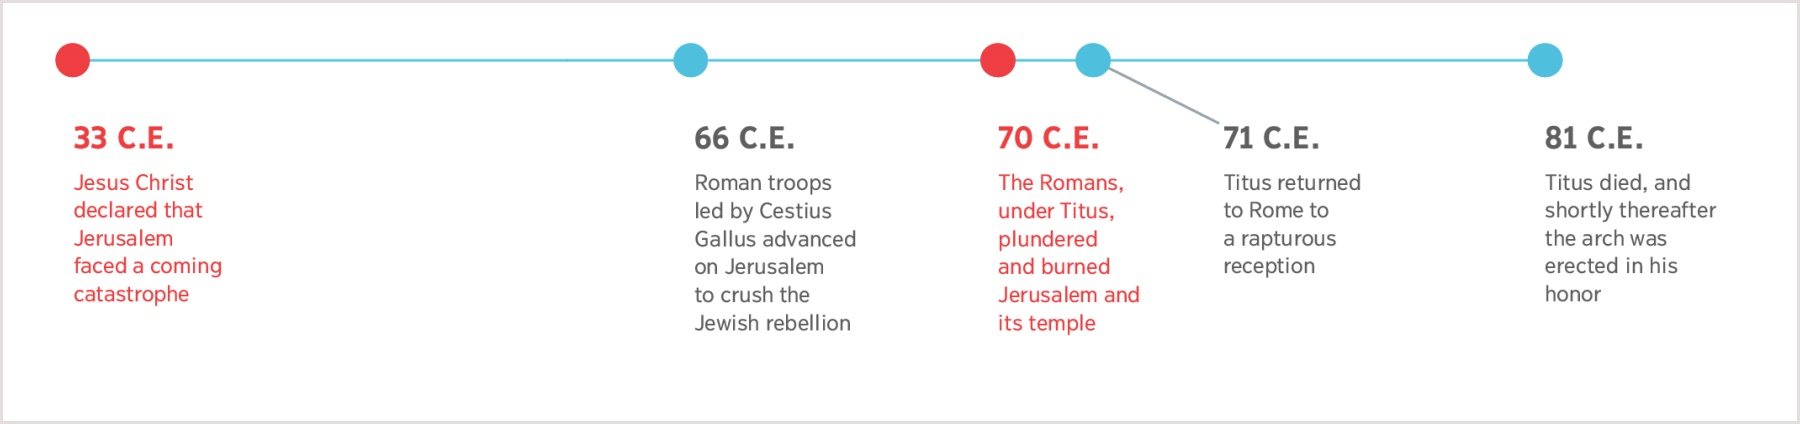 A timeline from 33 C.E. when Jesus foretold Jerusalem’s destruction until the death of Titus in 81 C.E.